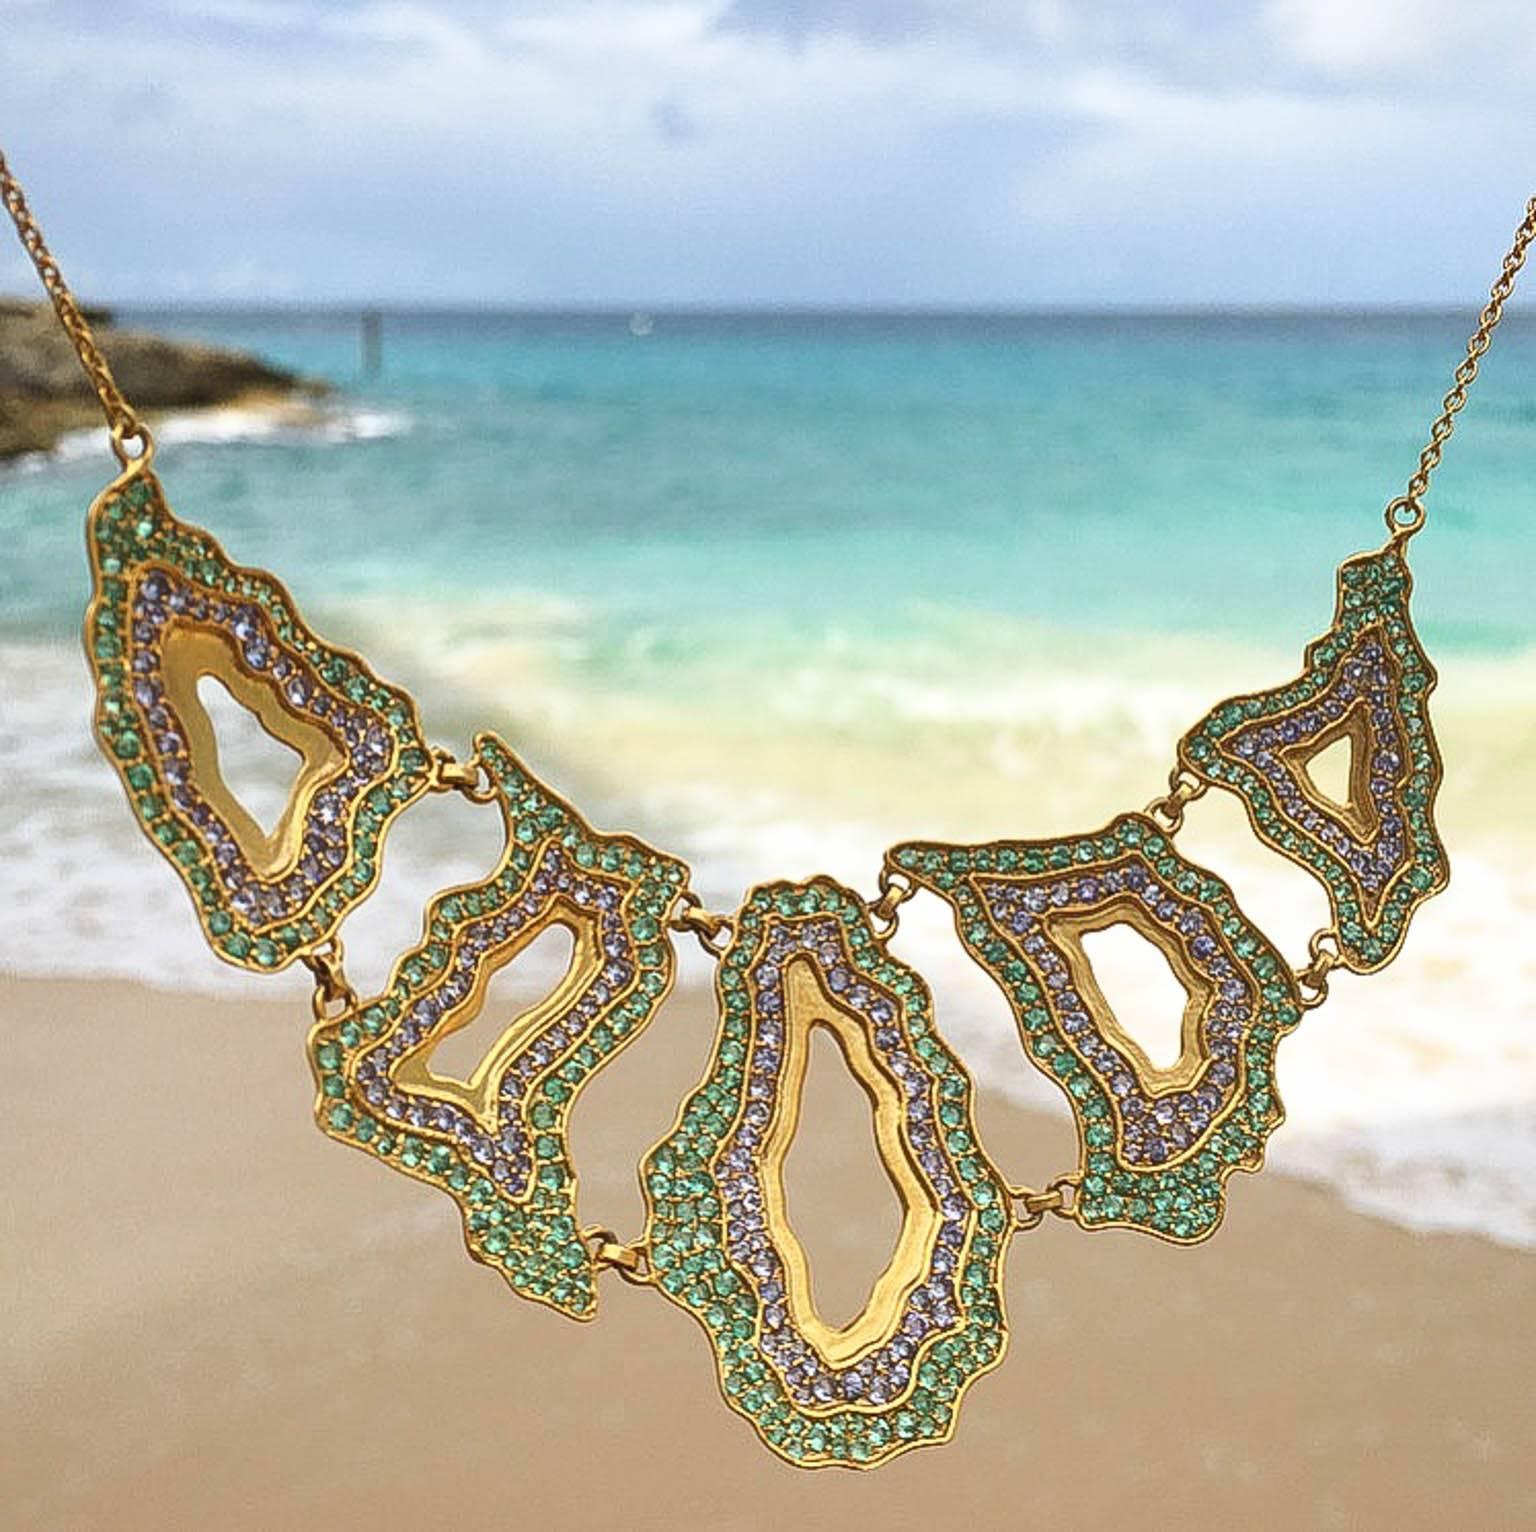 Truly spectacular, this colorful Emerald and Tanzanite necklace mimics the patterns and shapes of natural geodes and agates, but is entirely made out of precious stones and Lauren Harper's signature 18kt matte gold. Each of the 5 components lays